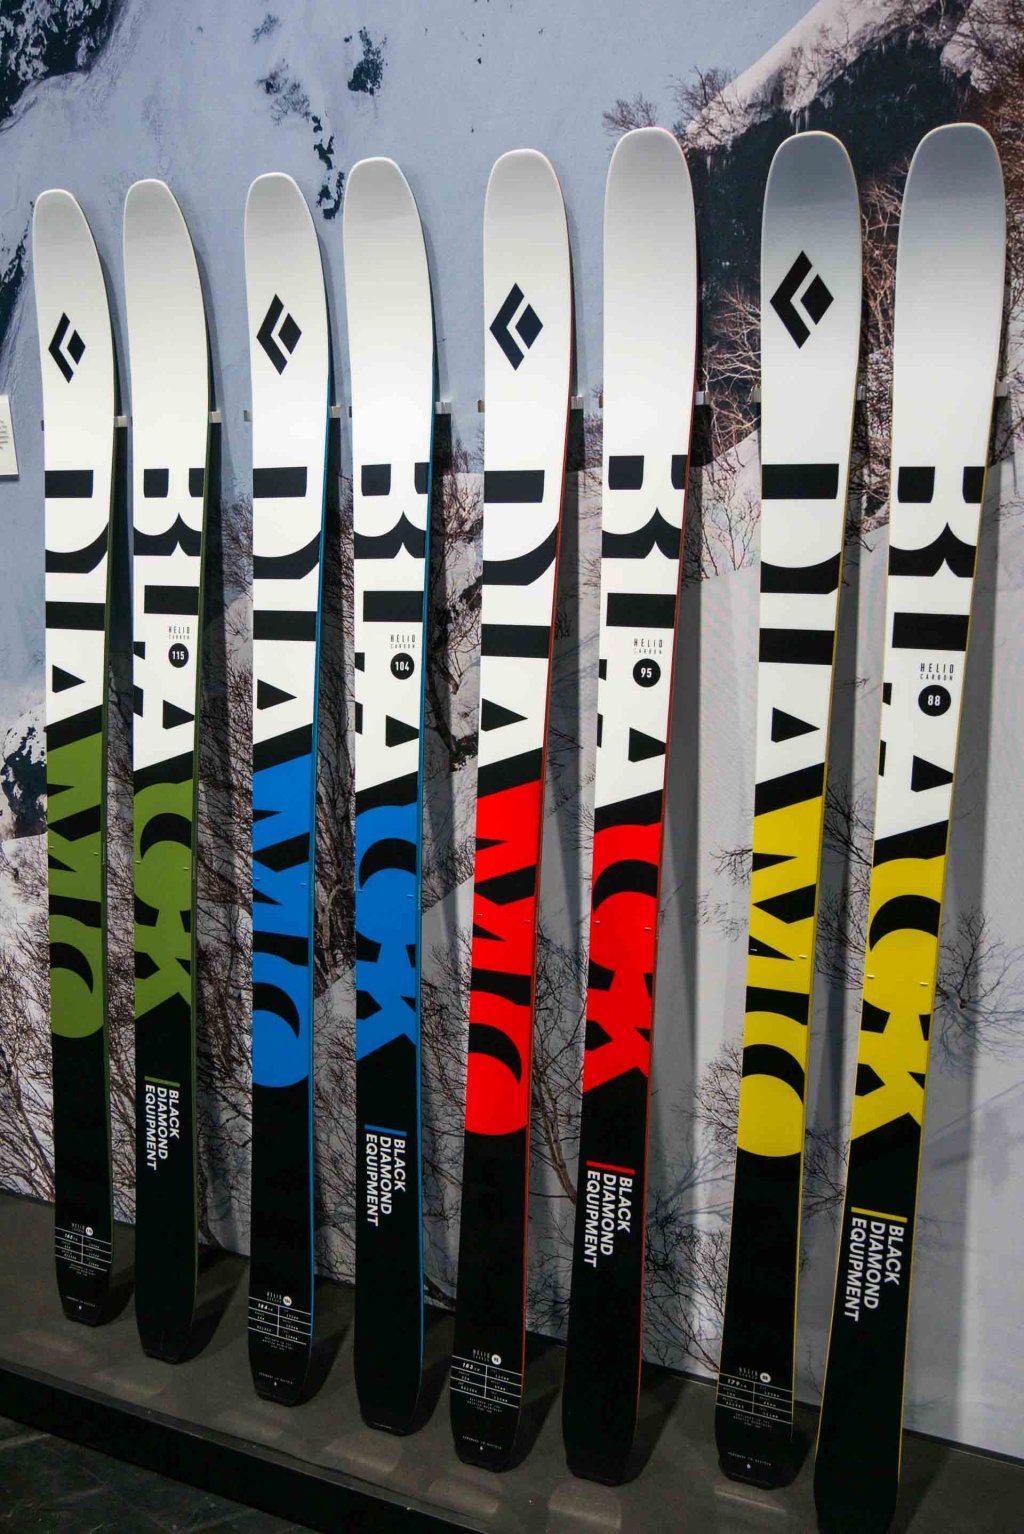 The touring skis from BlackDiamond